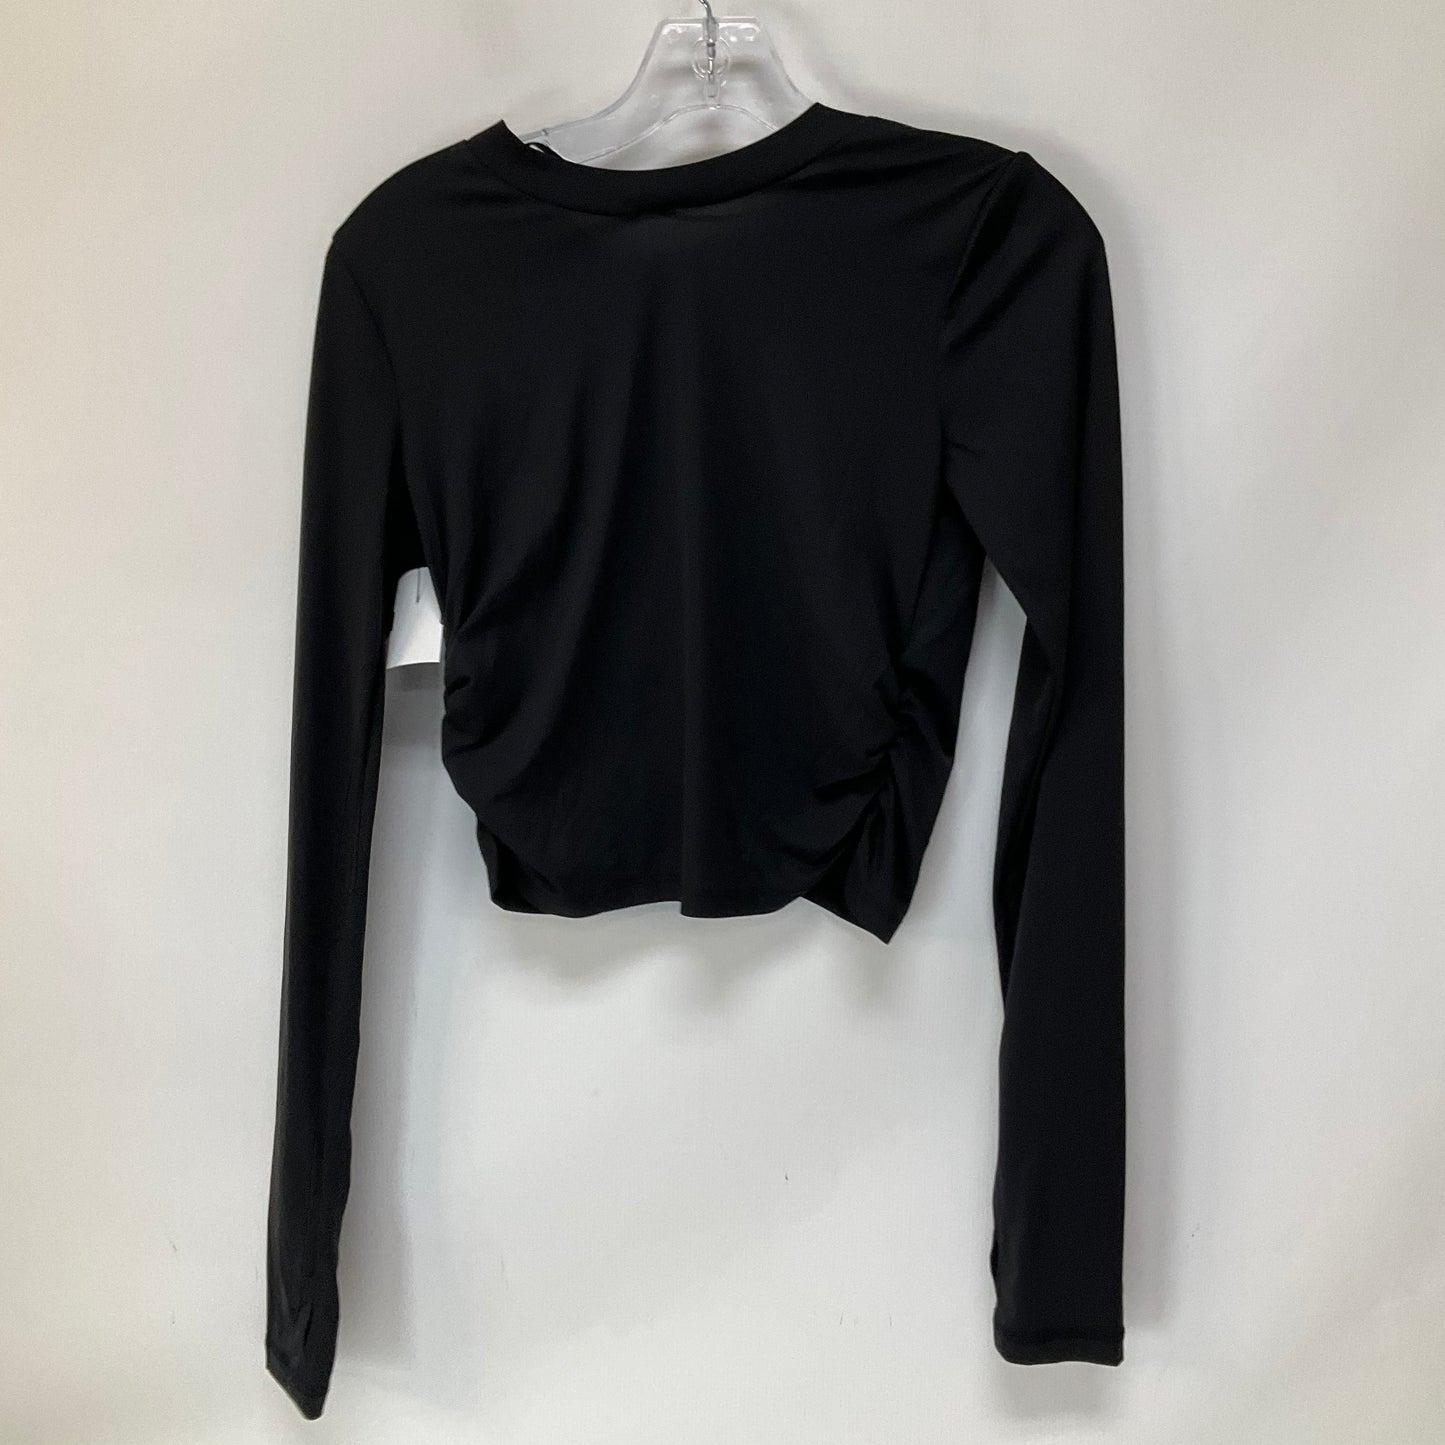 Black Top Long Sleeve Free People, Size S